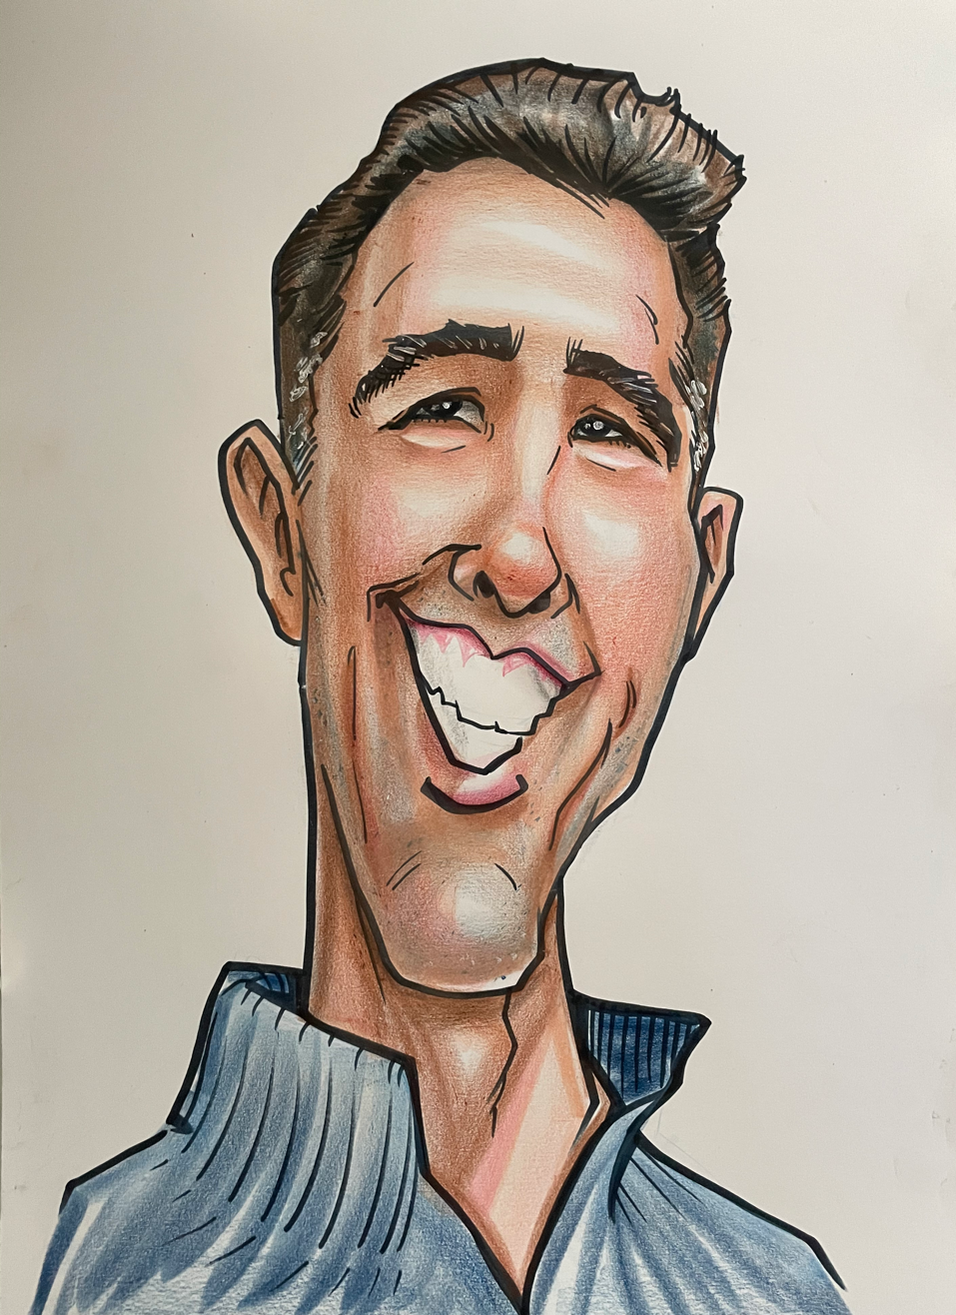 Northern California artist JAGuerzon draws a color caricature commission for a retirement party in Fremont, California.